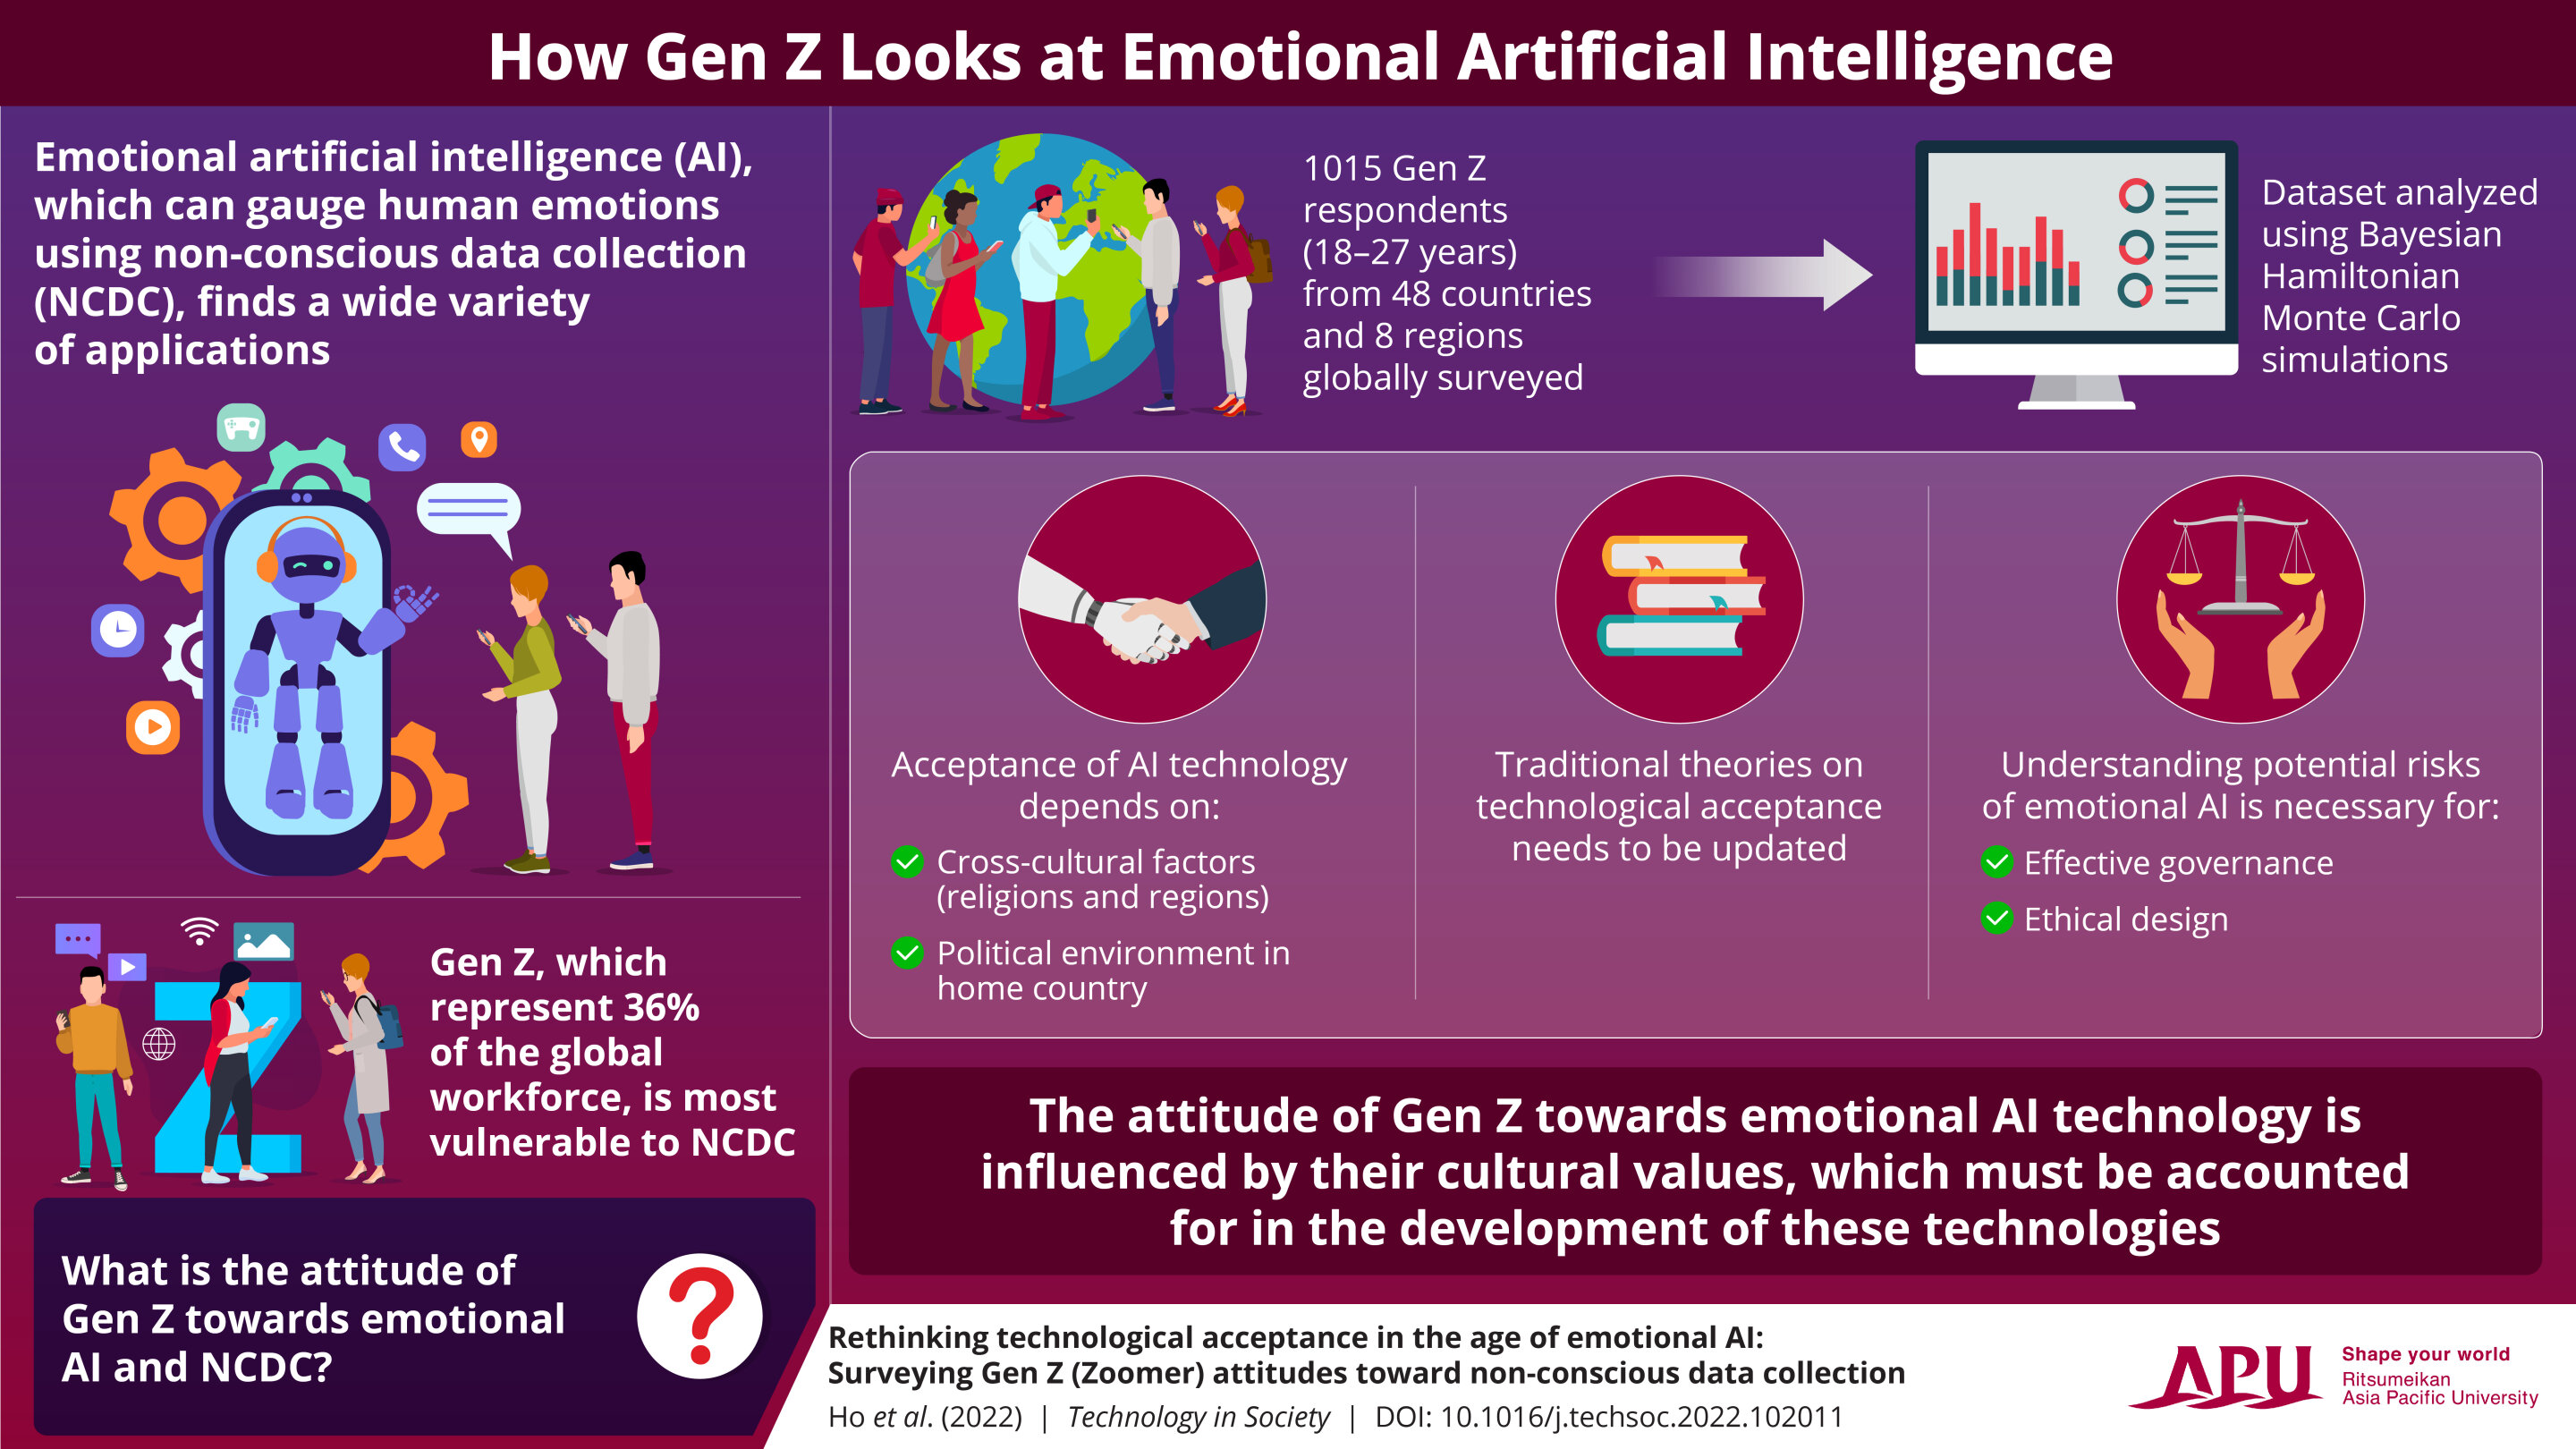 Emotional AI and gen Z: The attitude towards new technology and its concerns